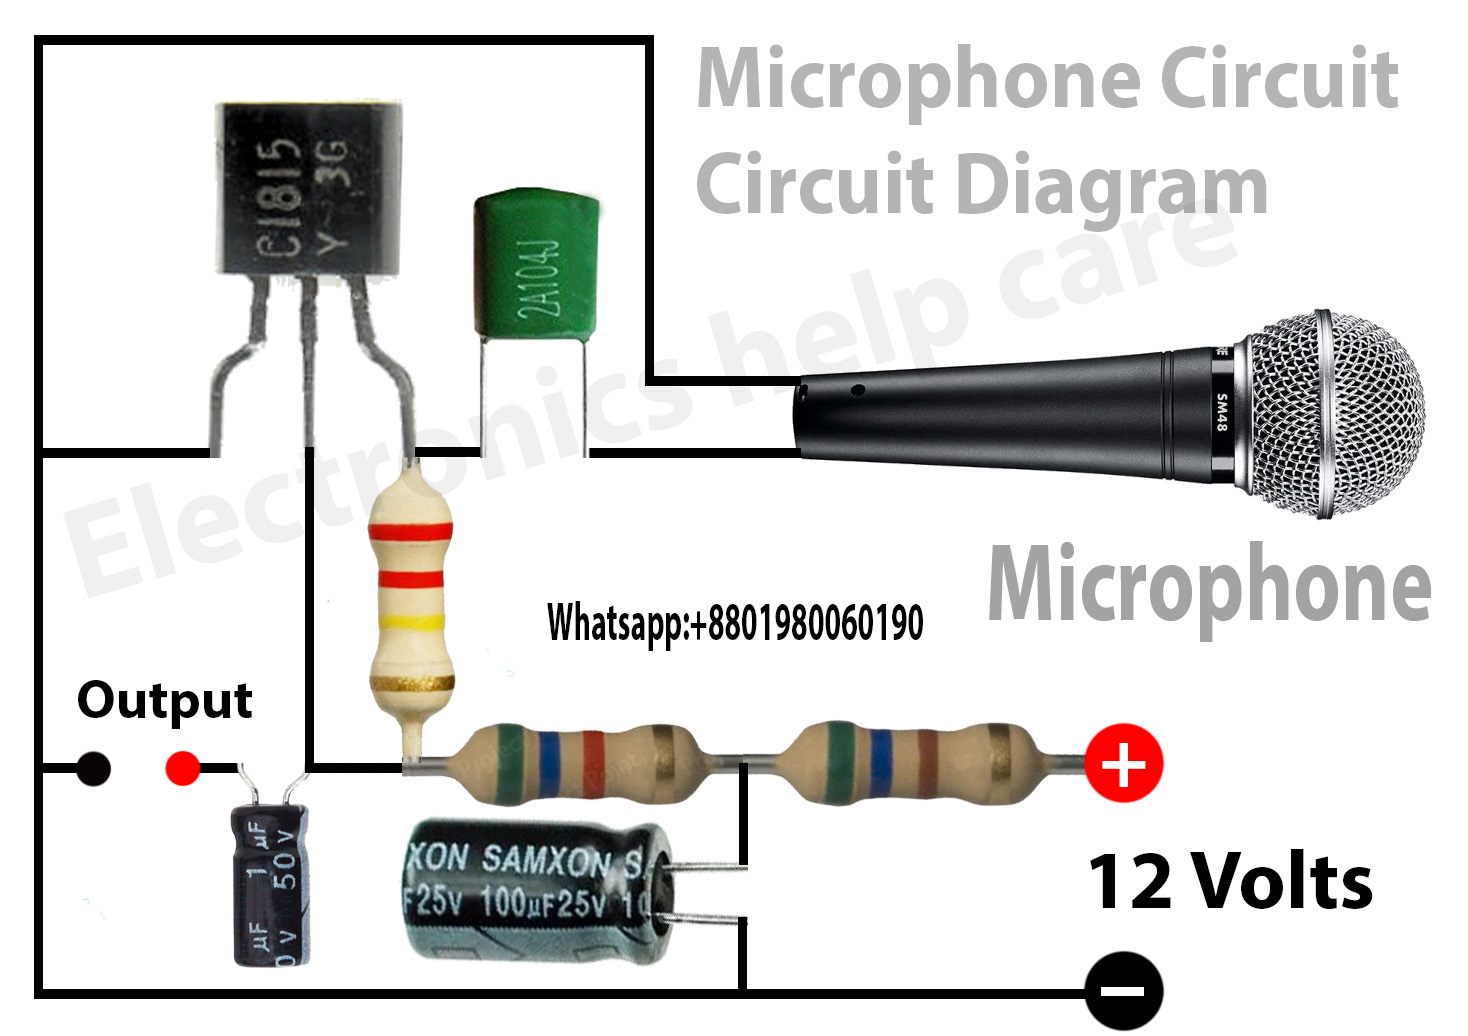 Microphone circuit diagram for amplifier